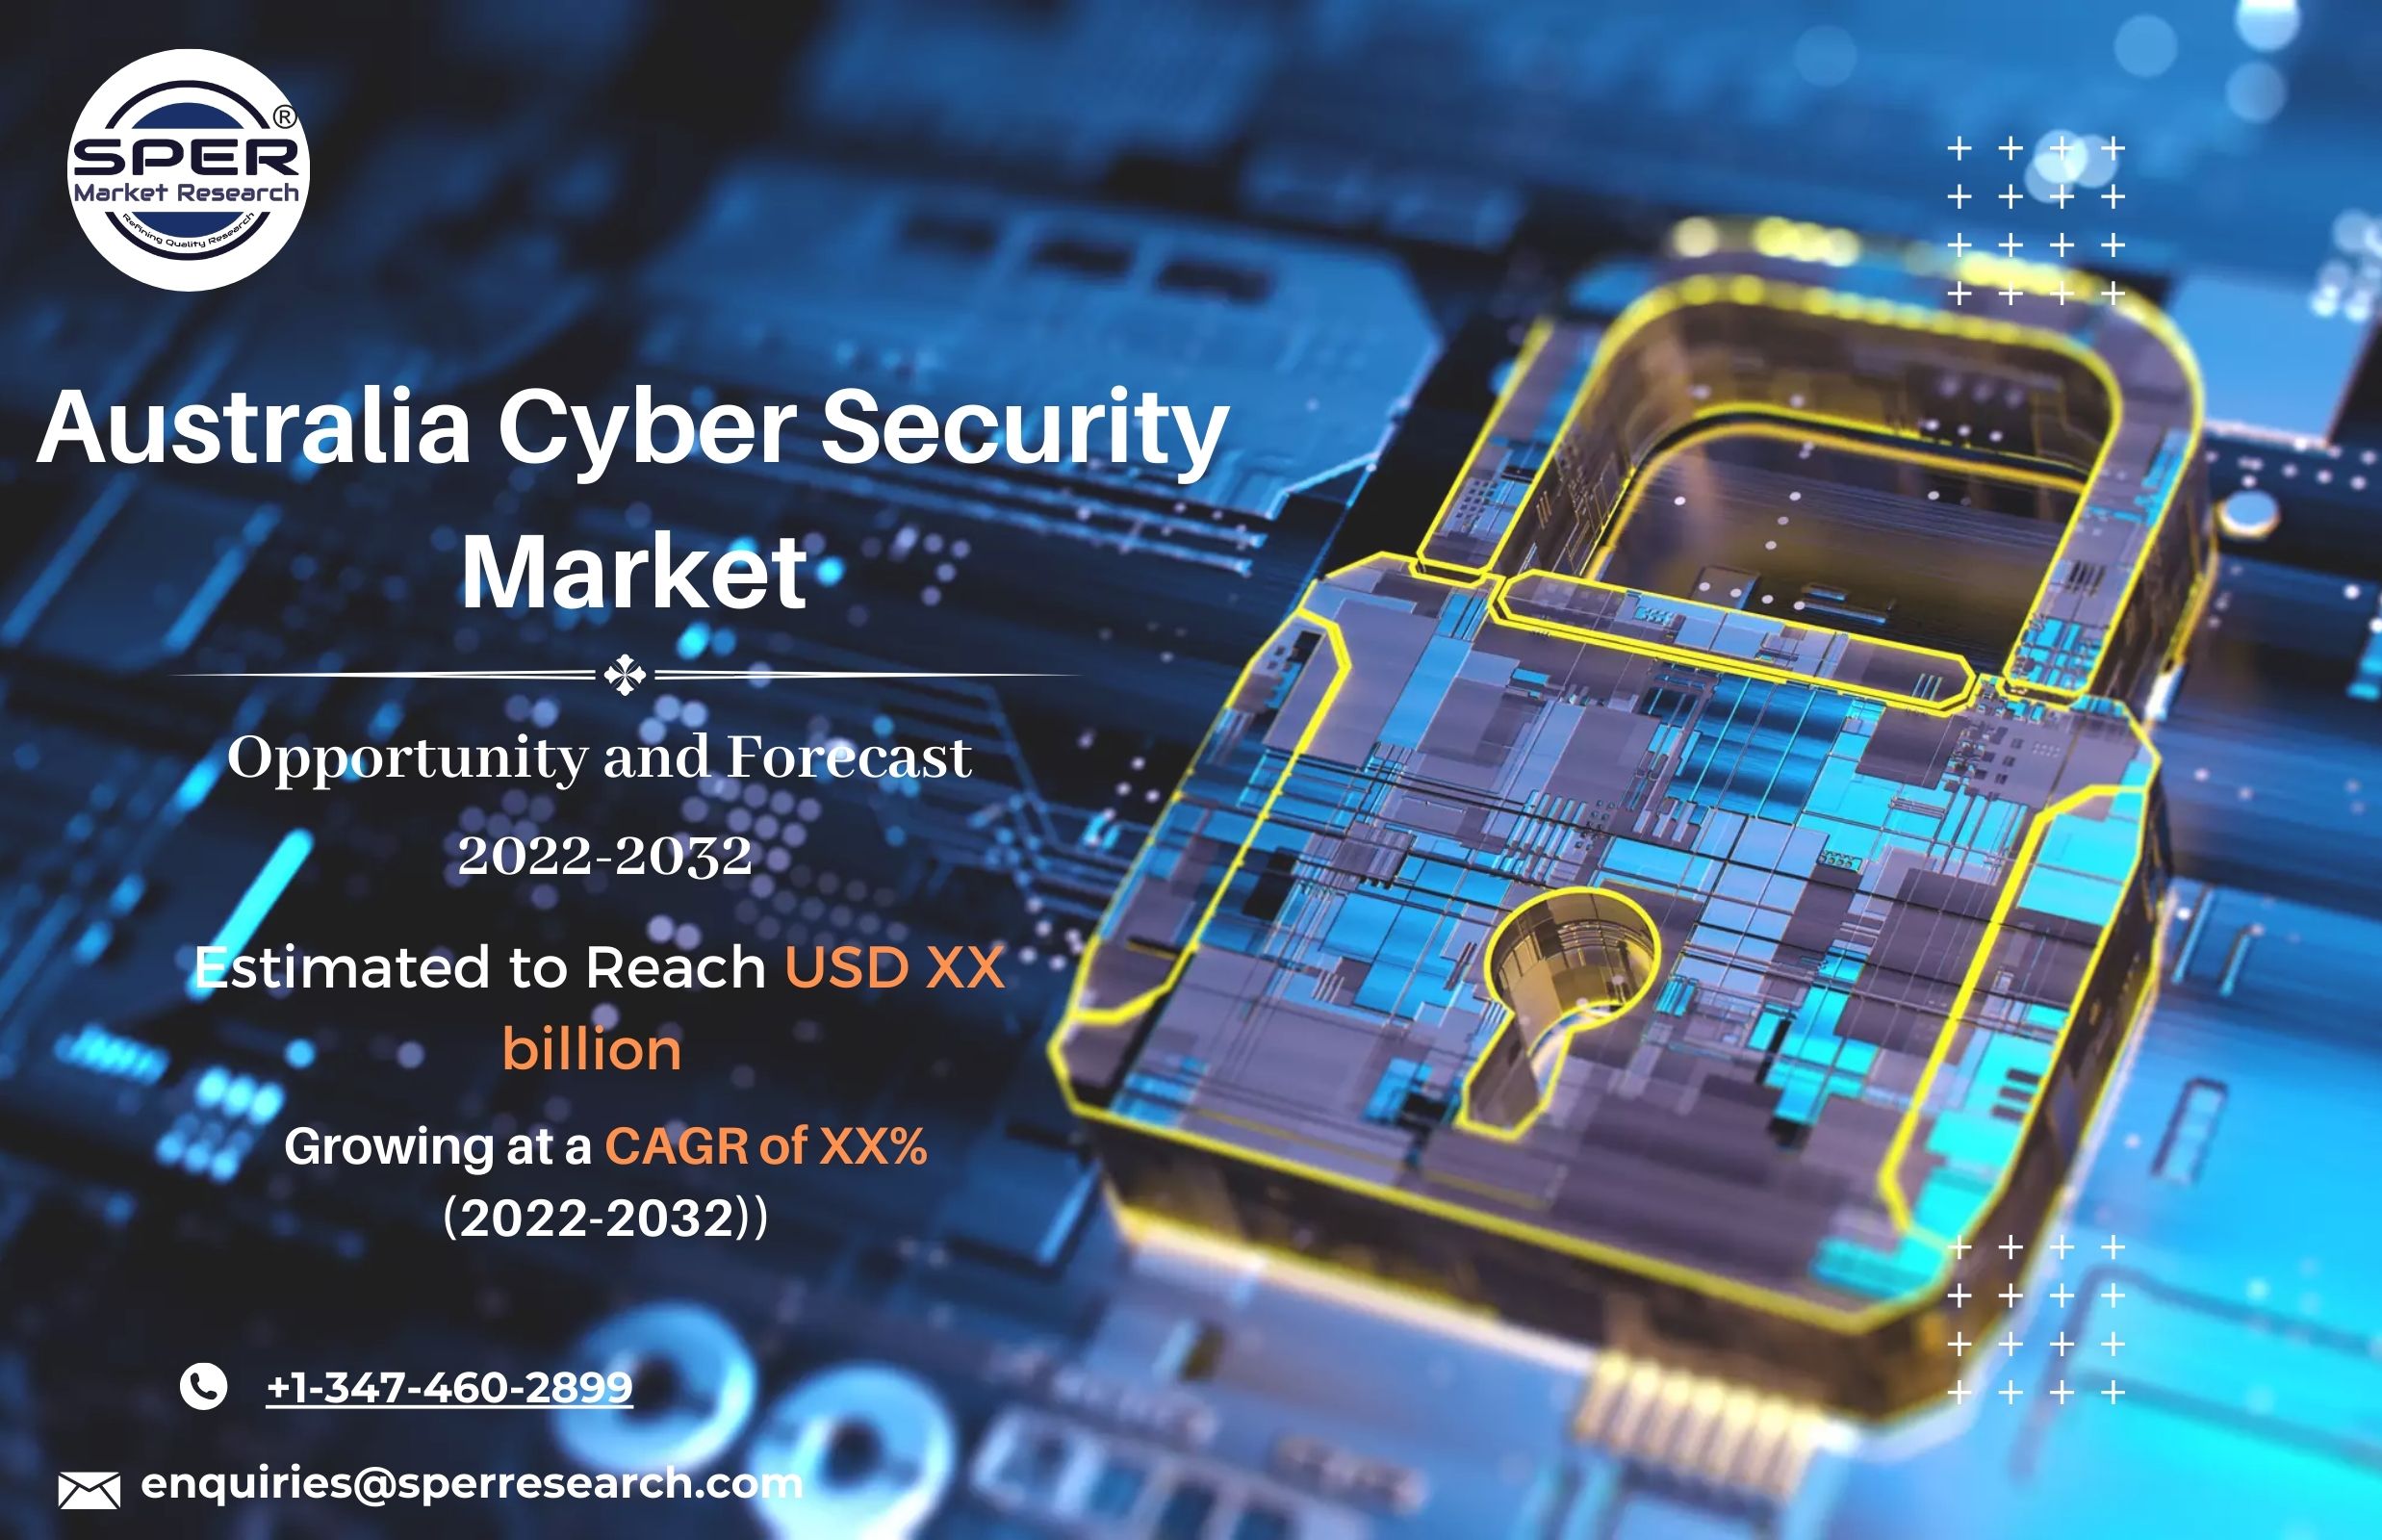 Australia Cyber Security Market Trends 2023- Industry Share, Growth, Revenue, Scope, Business Analysis, Opportunity, Challenges and Future Outlook 2032: SPER Market Research